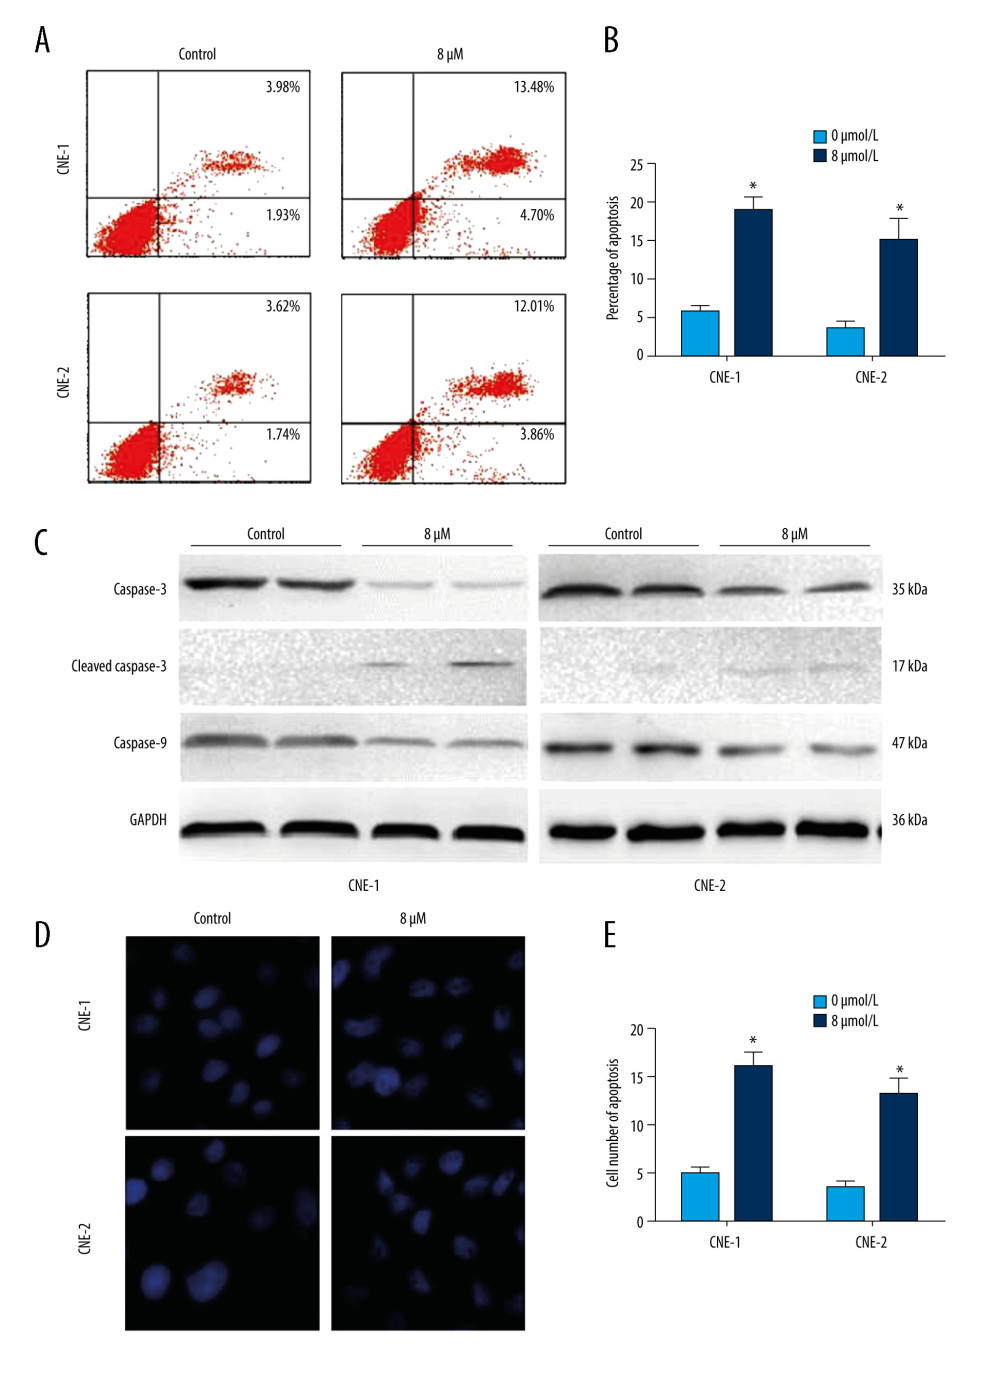 Effect of inhibition of FoxM1 on NPC cell apoptosis and nuclear morphology(A) CNE-1 and CNE-2 cells were exposed to vehicle or 8 μM of thiostrepton for 72 h, and then labeled with annexin-V and propidium iodide (PI) for an apoptosis assay using flow cytometry. (B) Quantification of data in A. (C) The cells were treated as in A for analysis by a western blot assay for protein expression of apoptotic markers caspases-3 and -9 in CNE-1 and CNE-2 cells. GAPDH was used as an internal control. (D) Thiostrepton-treated cells were stained with Hoechst 33258, and their nuclear morphology was observed under an immunofluorescence microscope. (E) Quantification of nuclear morphological impairment shown in D. Quantitative data are expressed as the means±SD for individual groups of cells from 3 separate experiments. * P<0.05 compared to the controls. NPC – nasopharyngeal carcinoma; FoxM1 – forkhead box M1.